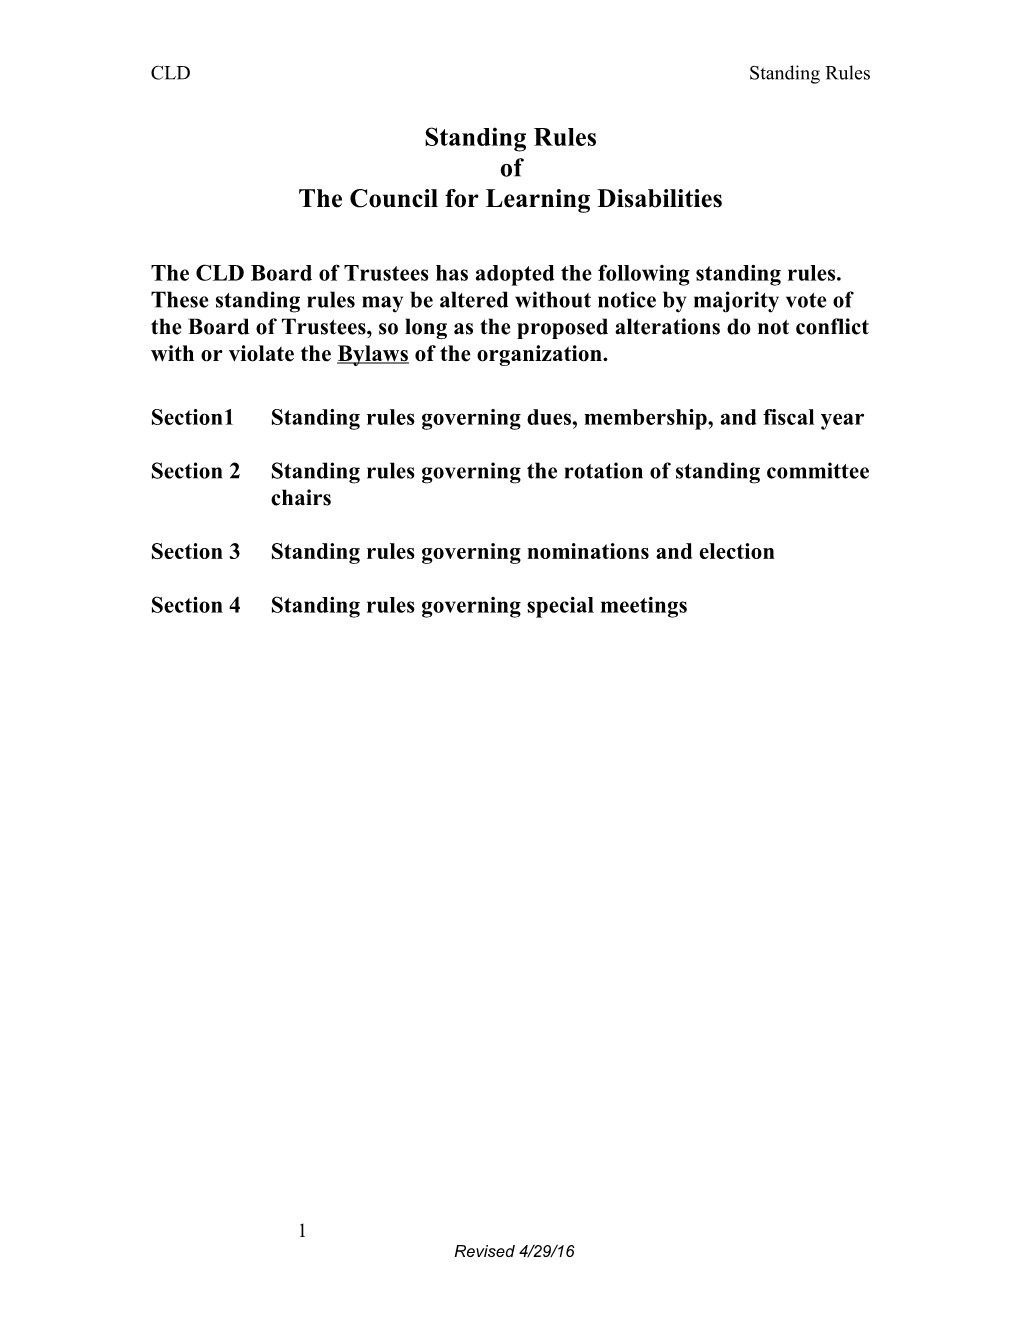 The Council for Learning Disabilities